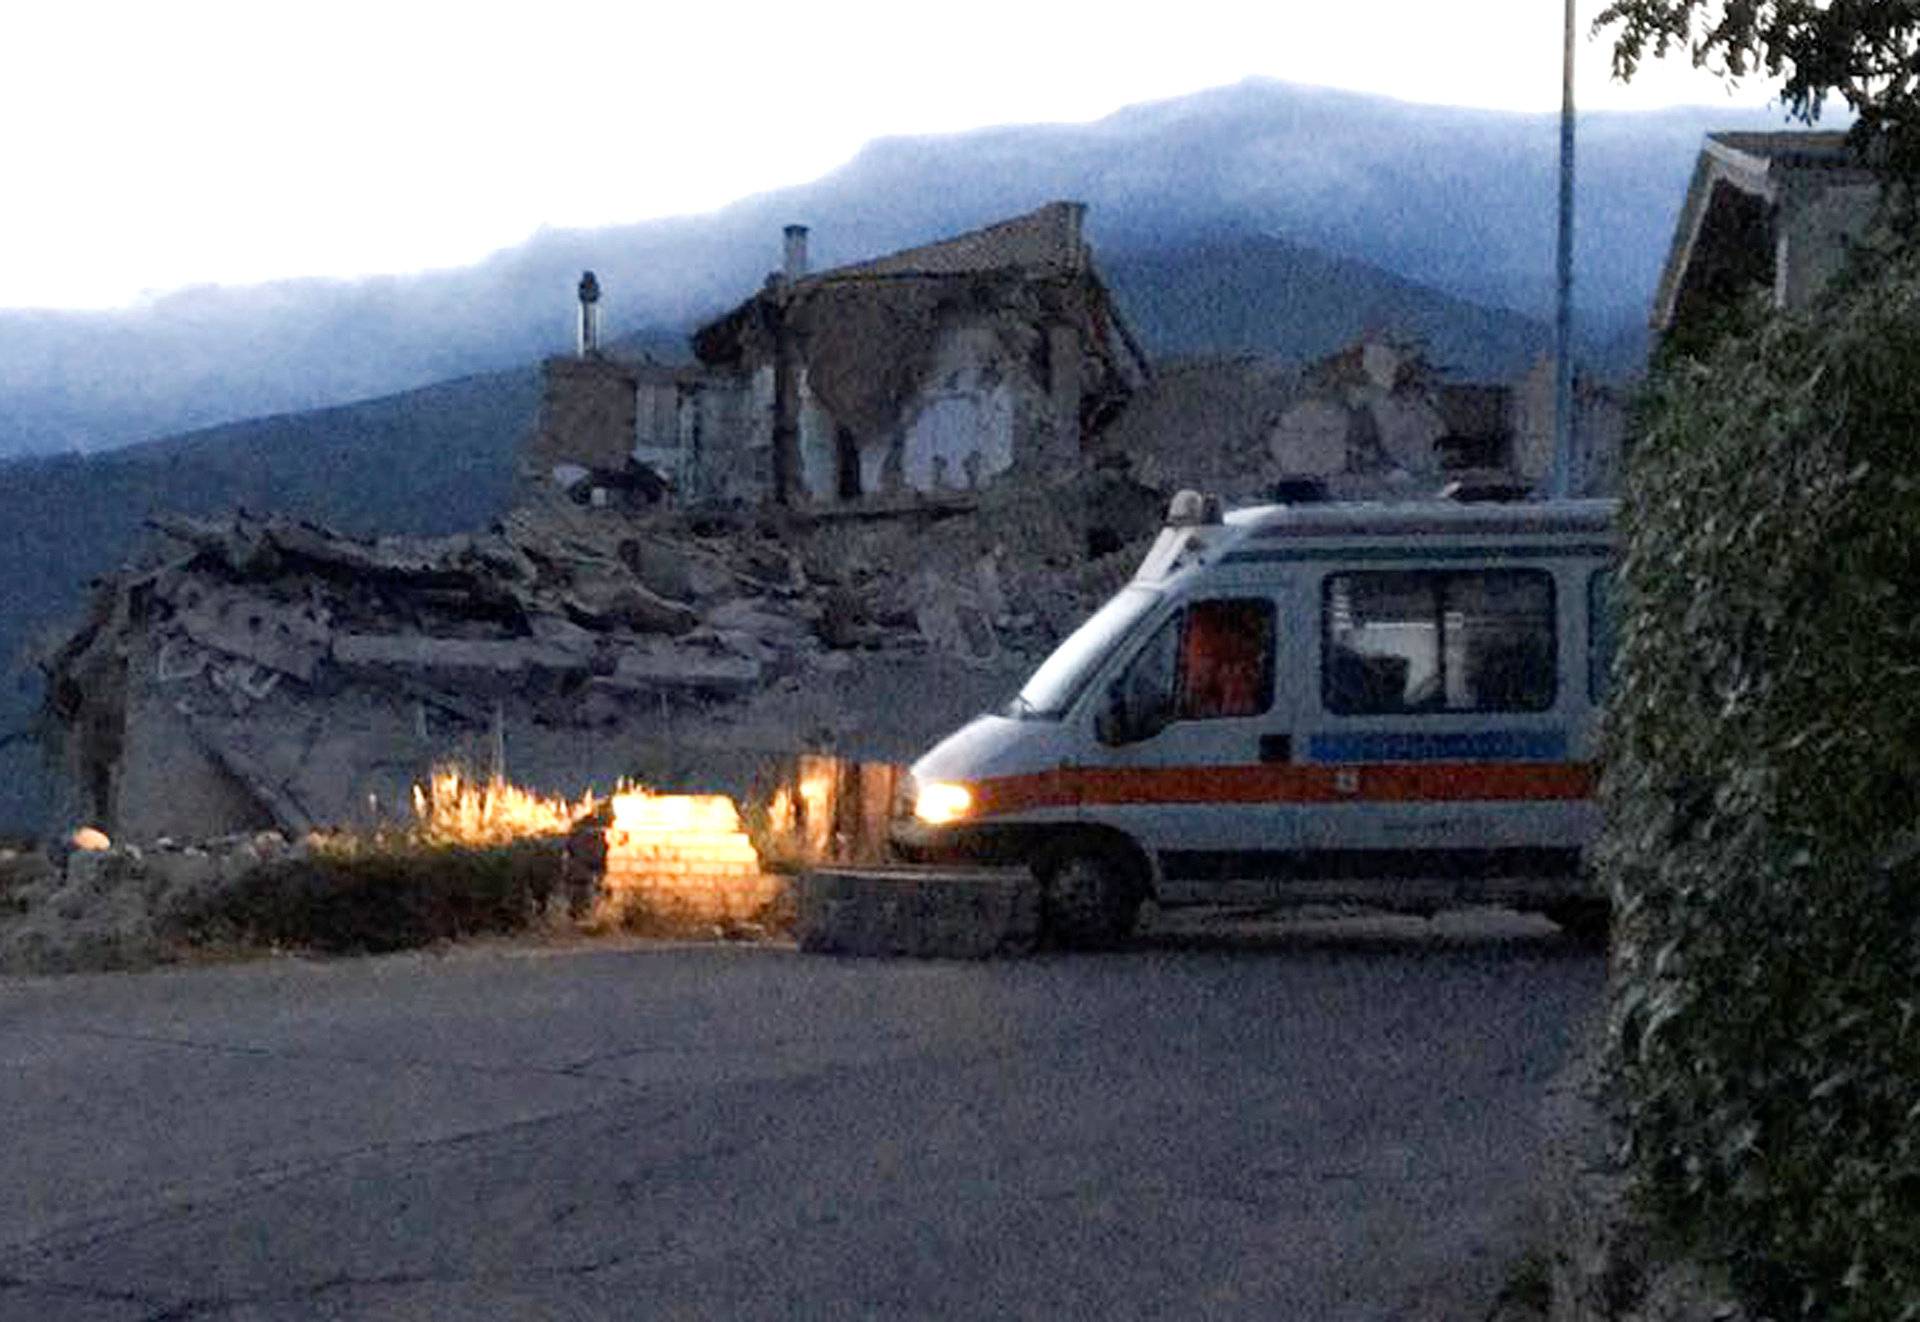 A destroyed house is seen following a quake in Amatrice